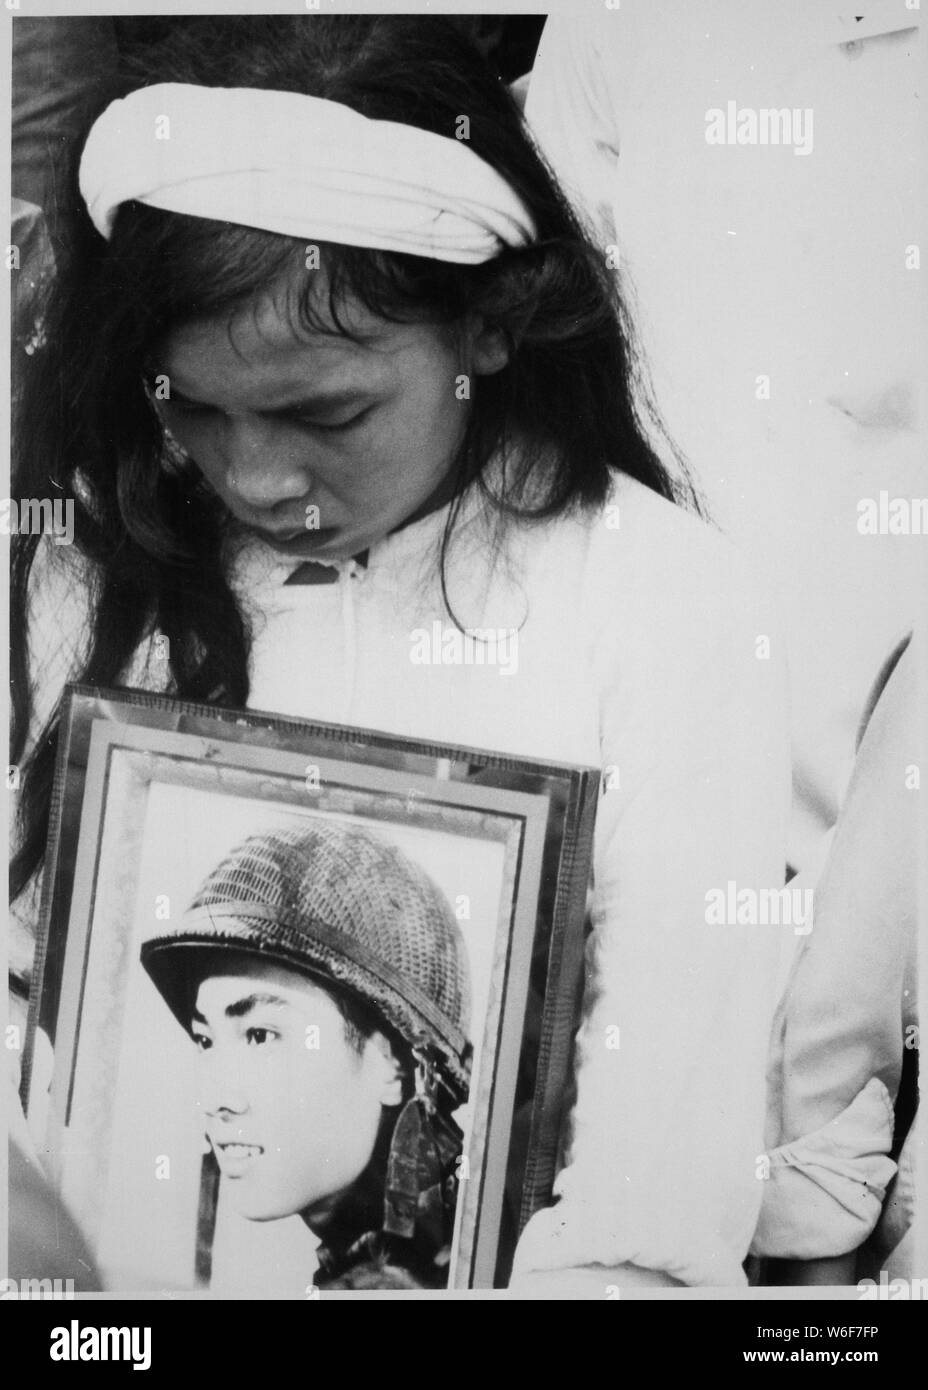 Almost 400 men, women and children massacred by the Viet Cong during Tet 1968 were mourned at a common-grave burial on October 14. This young widow, carrying a photograph of her missing husband, mourns at the mass funeral service. Hue, 1968., 1958 - 1974; General notes:  Use War and Conflict Number 427 when ordering a reproduction or requesting information about this image. Stock Photo